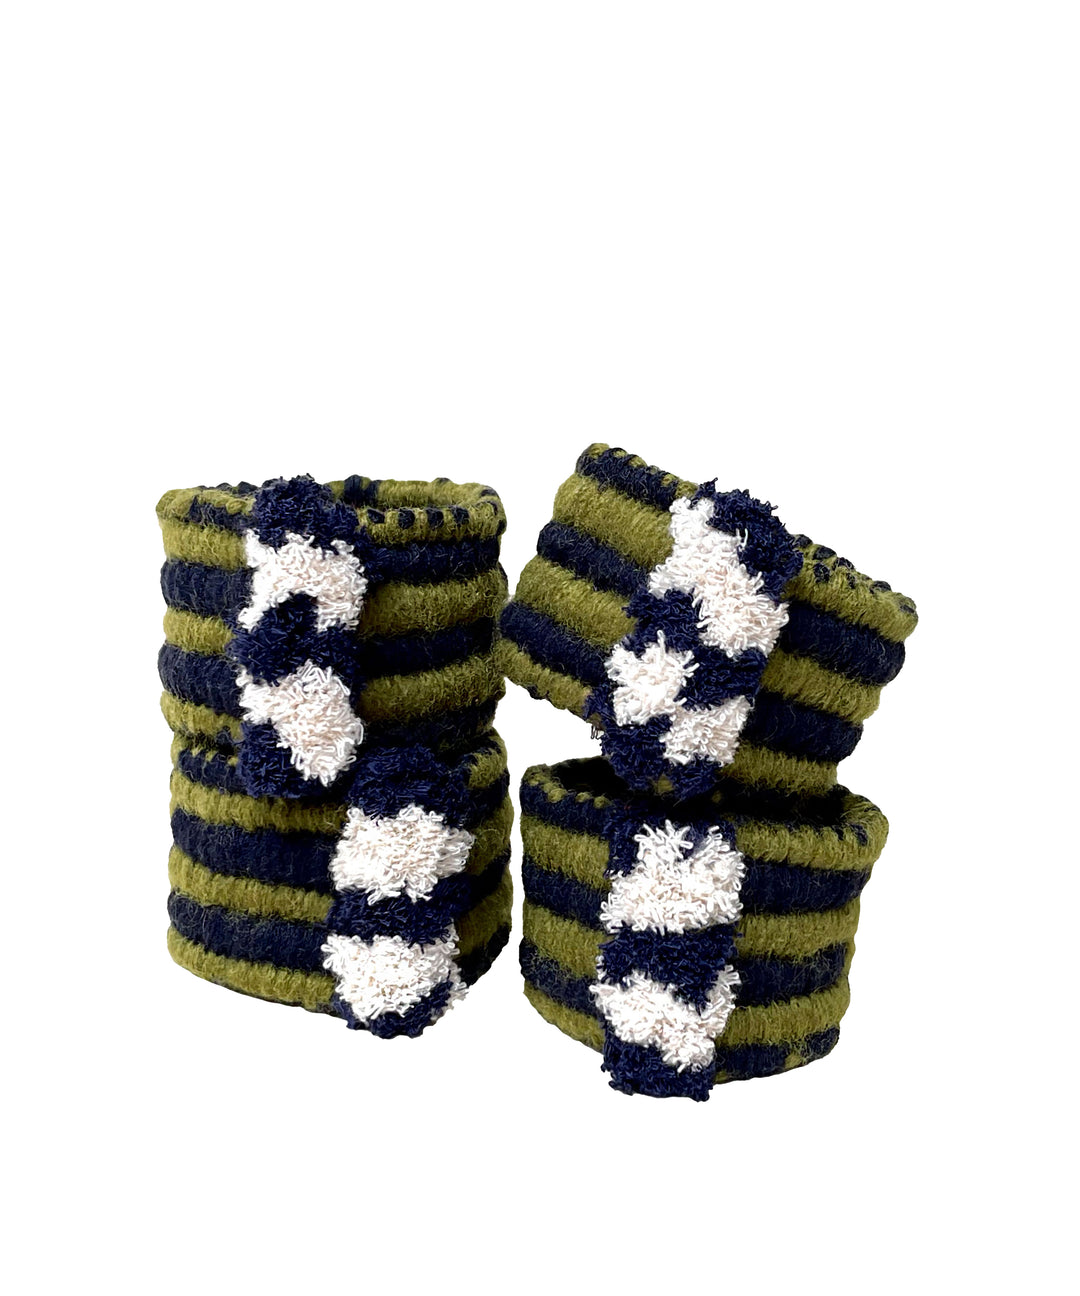 Moss Handwoven Napkin Rings - Striped Set of 4